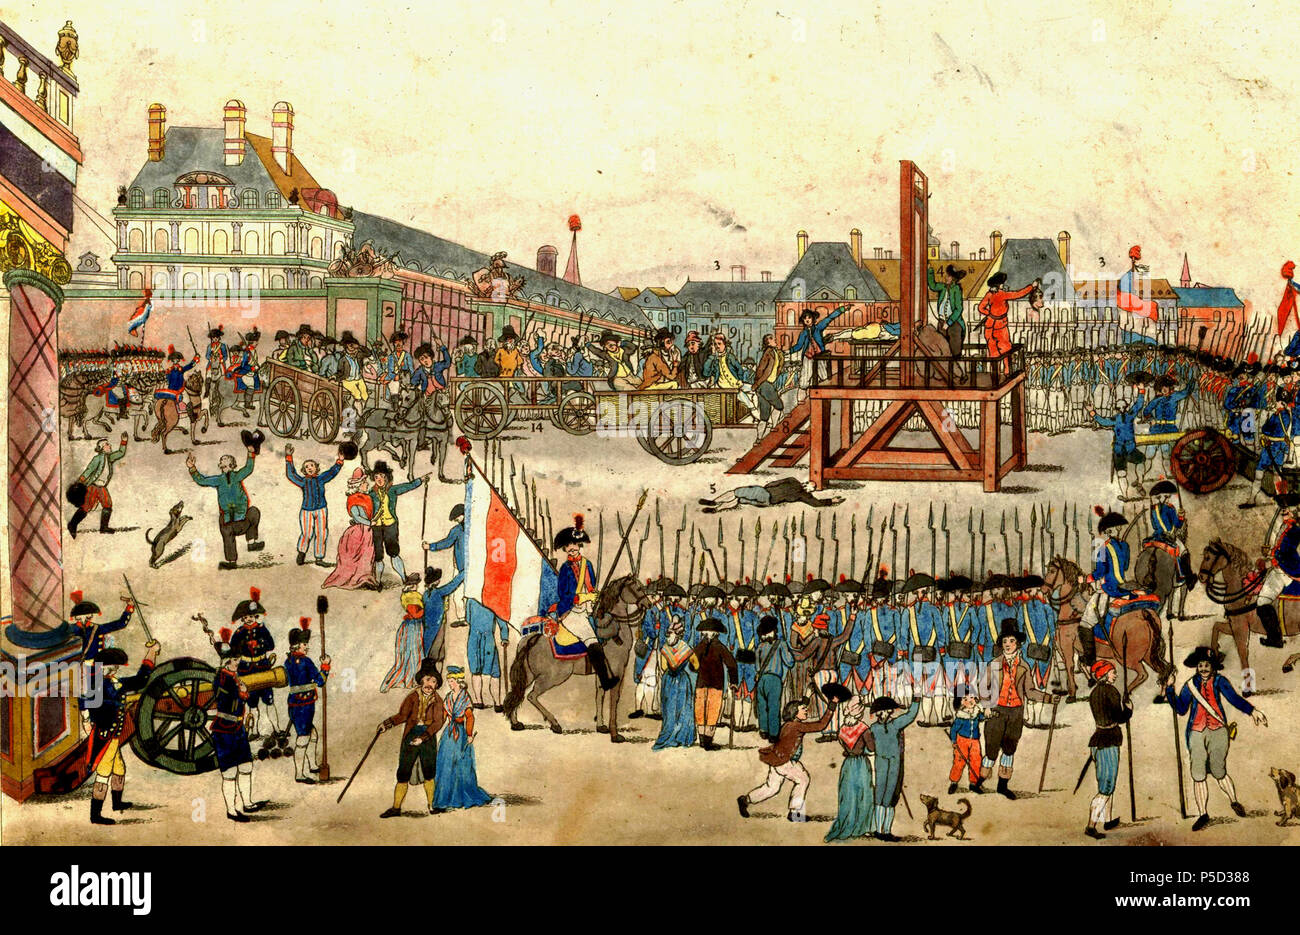 N/A. Deutsch: Die Hinrichtung Robespierres und seiner Anhänger am 28. Juli 1794 English: The execution of Robespierre and his supporters on 28 July 1794. Note: the beheaded man (6) is not Robespierre, but Couthon: Maximilien Robespierre (10) is shown sitting on the cart, dressed in brown, wearing a hat, and holding a handkerchief to his mouth. His younger brother Augustin (8) is being led up the steps to the scaffold. Français : Exécution de Robespierre et de ses complices conspirateurs contre la liberté et l'égalité : vive la Convention nationale qui par son énergie et surveillance a délivré  Stock Photo